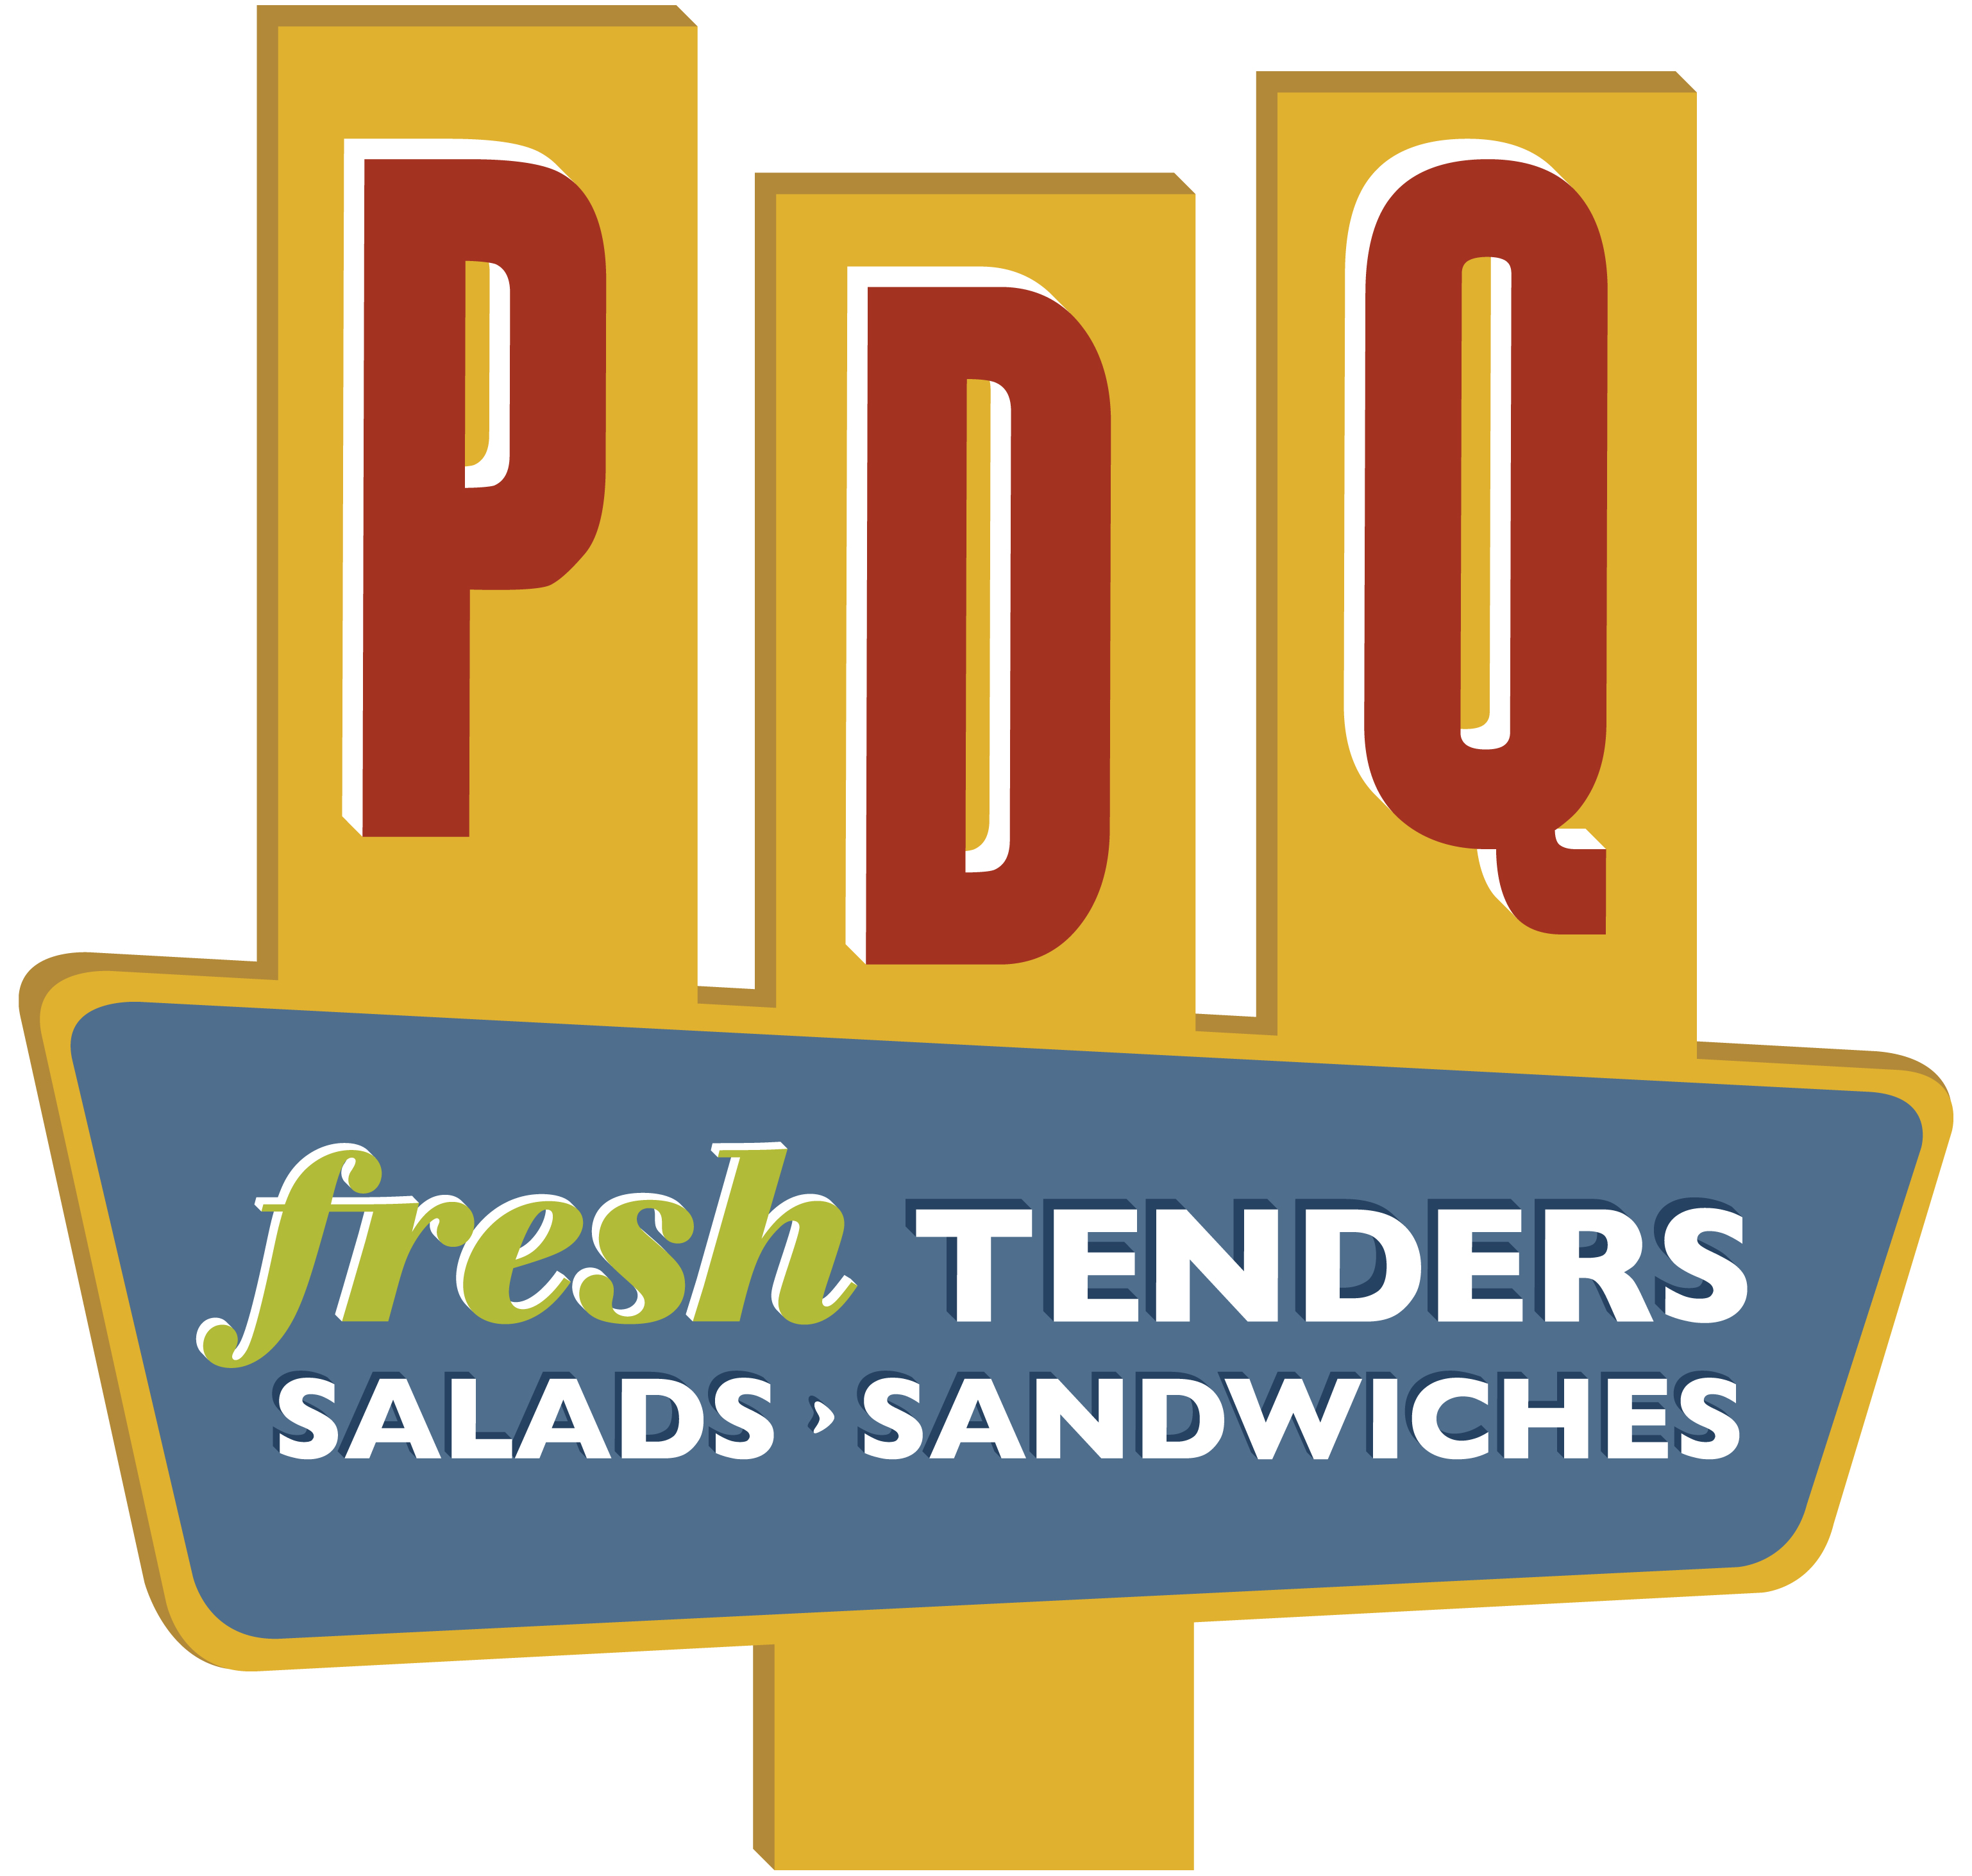 Sponsor PDQ in Cary